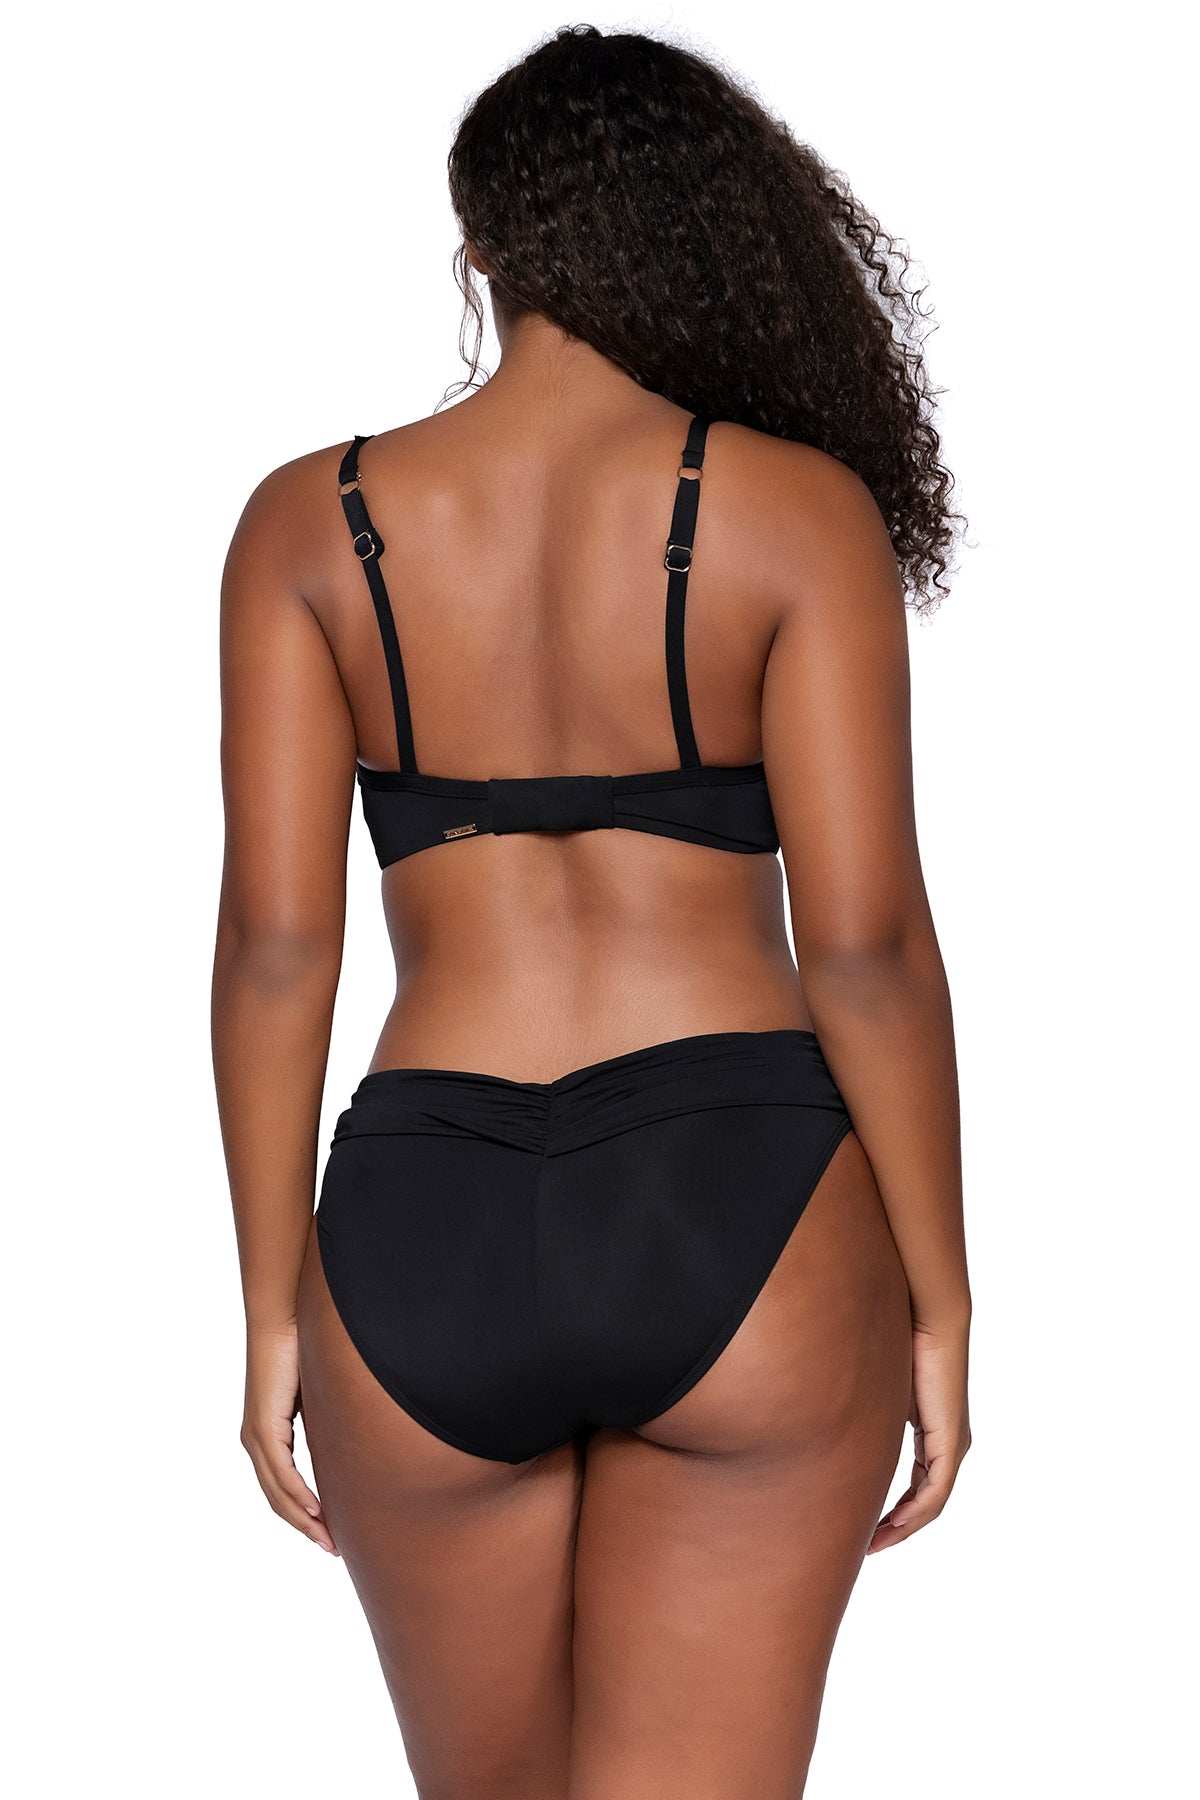 Back view of Sunsets Black Iconic Twist Bandeau bikini top with Black Unforgettable Bottom hipster featuring additional model